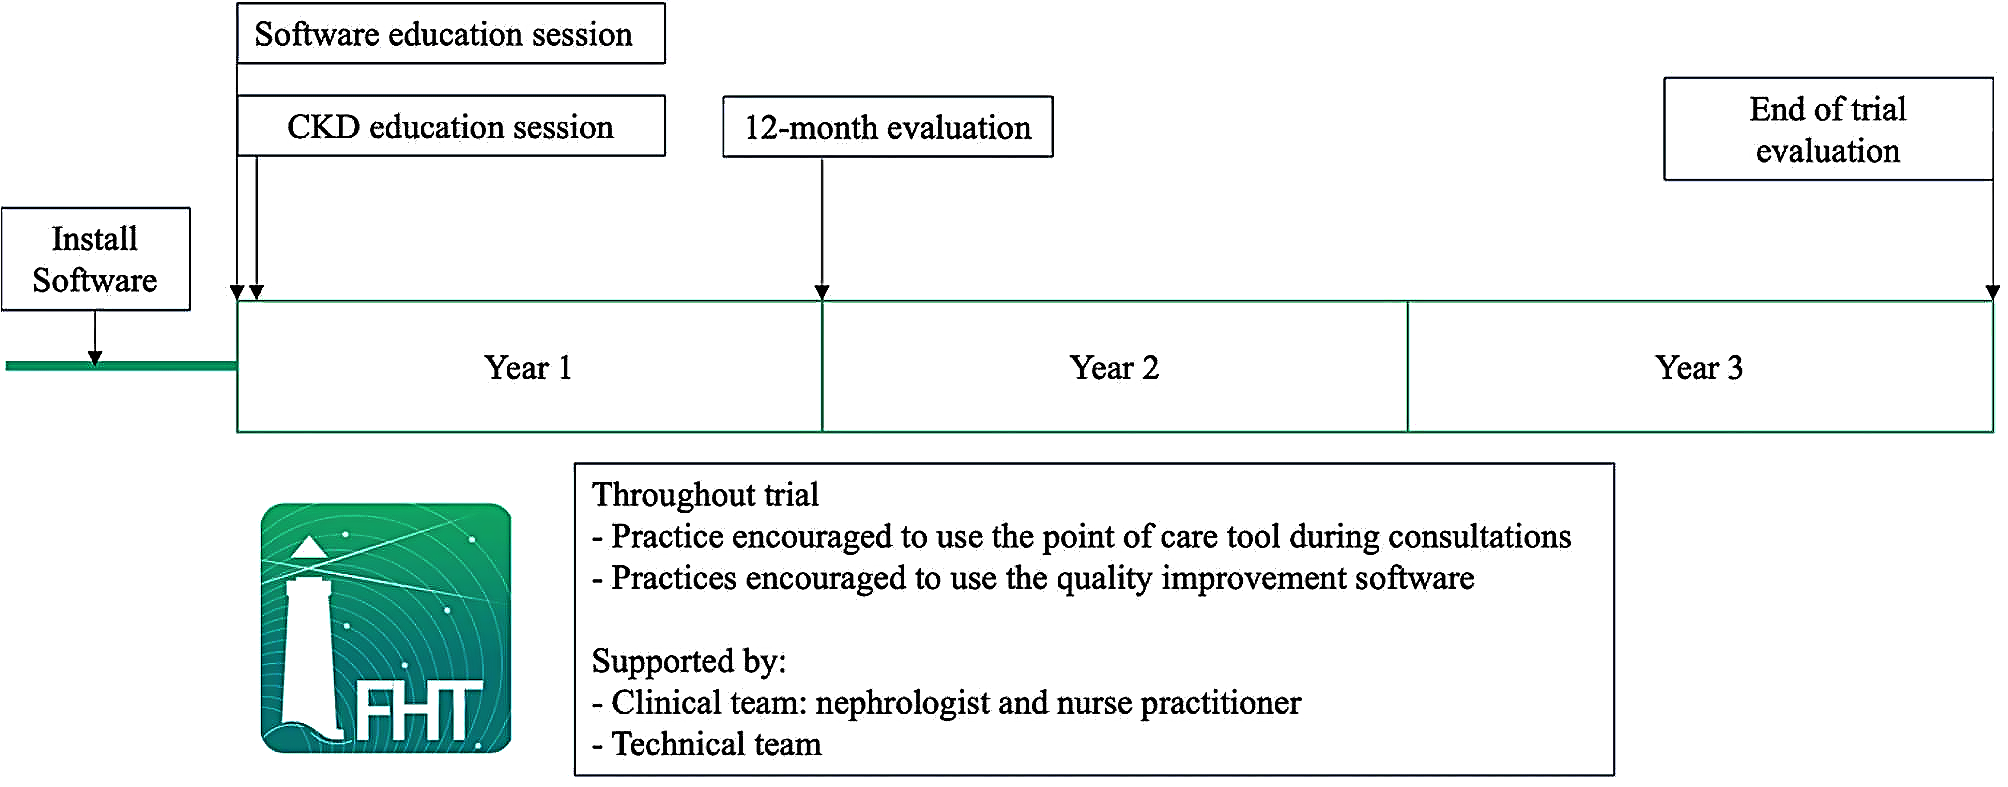 Optimising diagnosis and management of kidney disease: an implementation trial of a clinical decision support system future health today